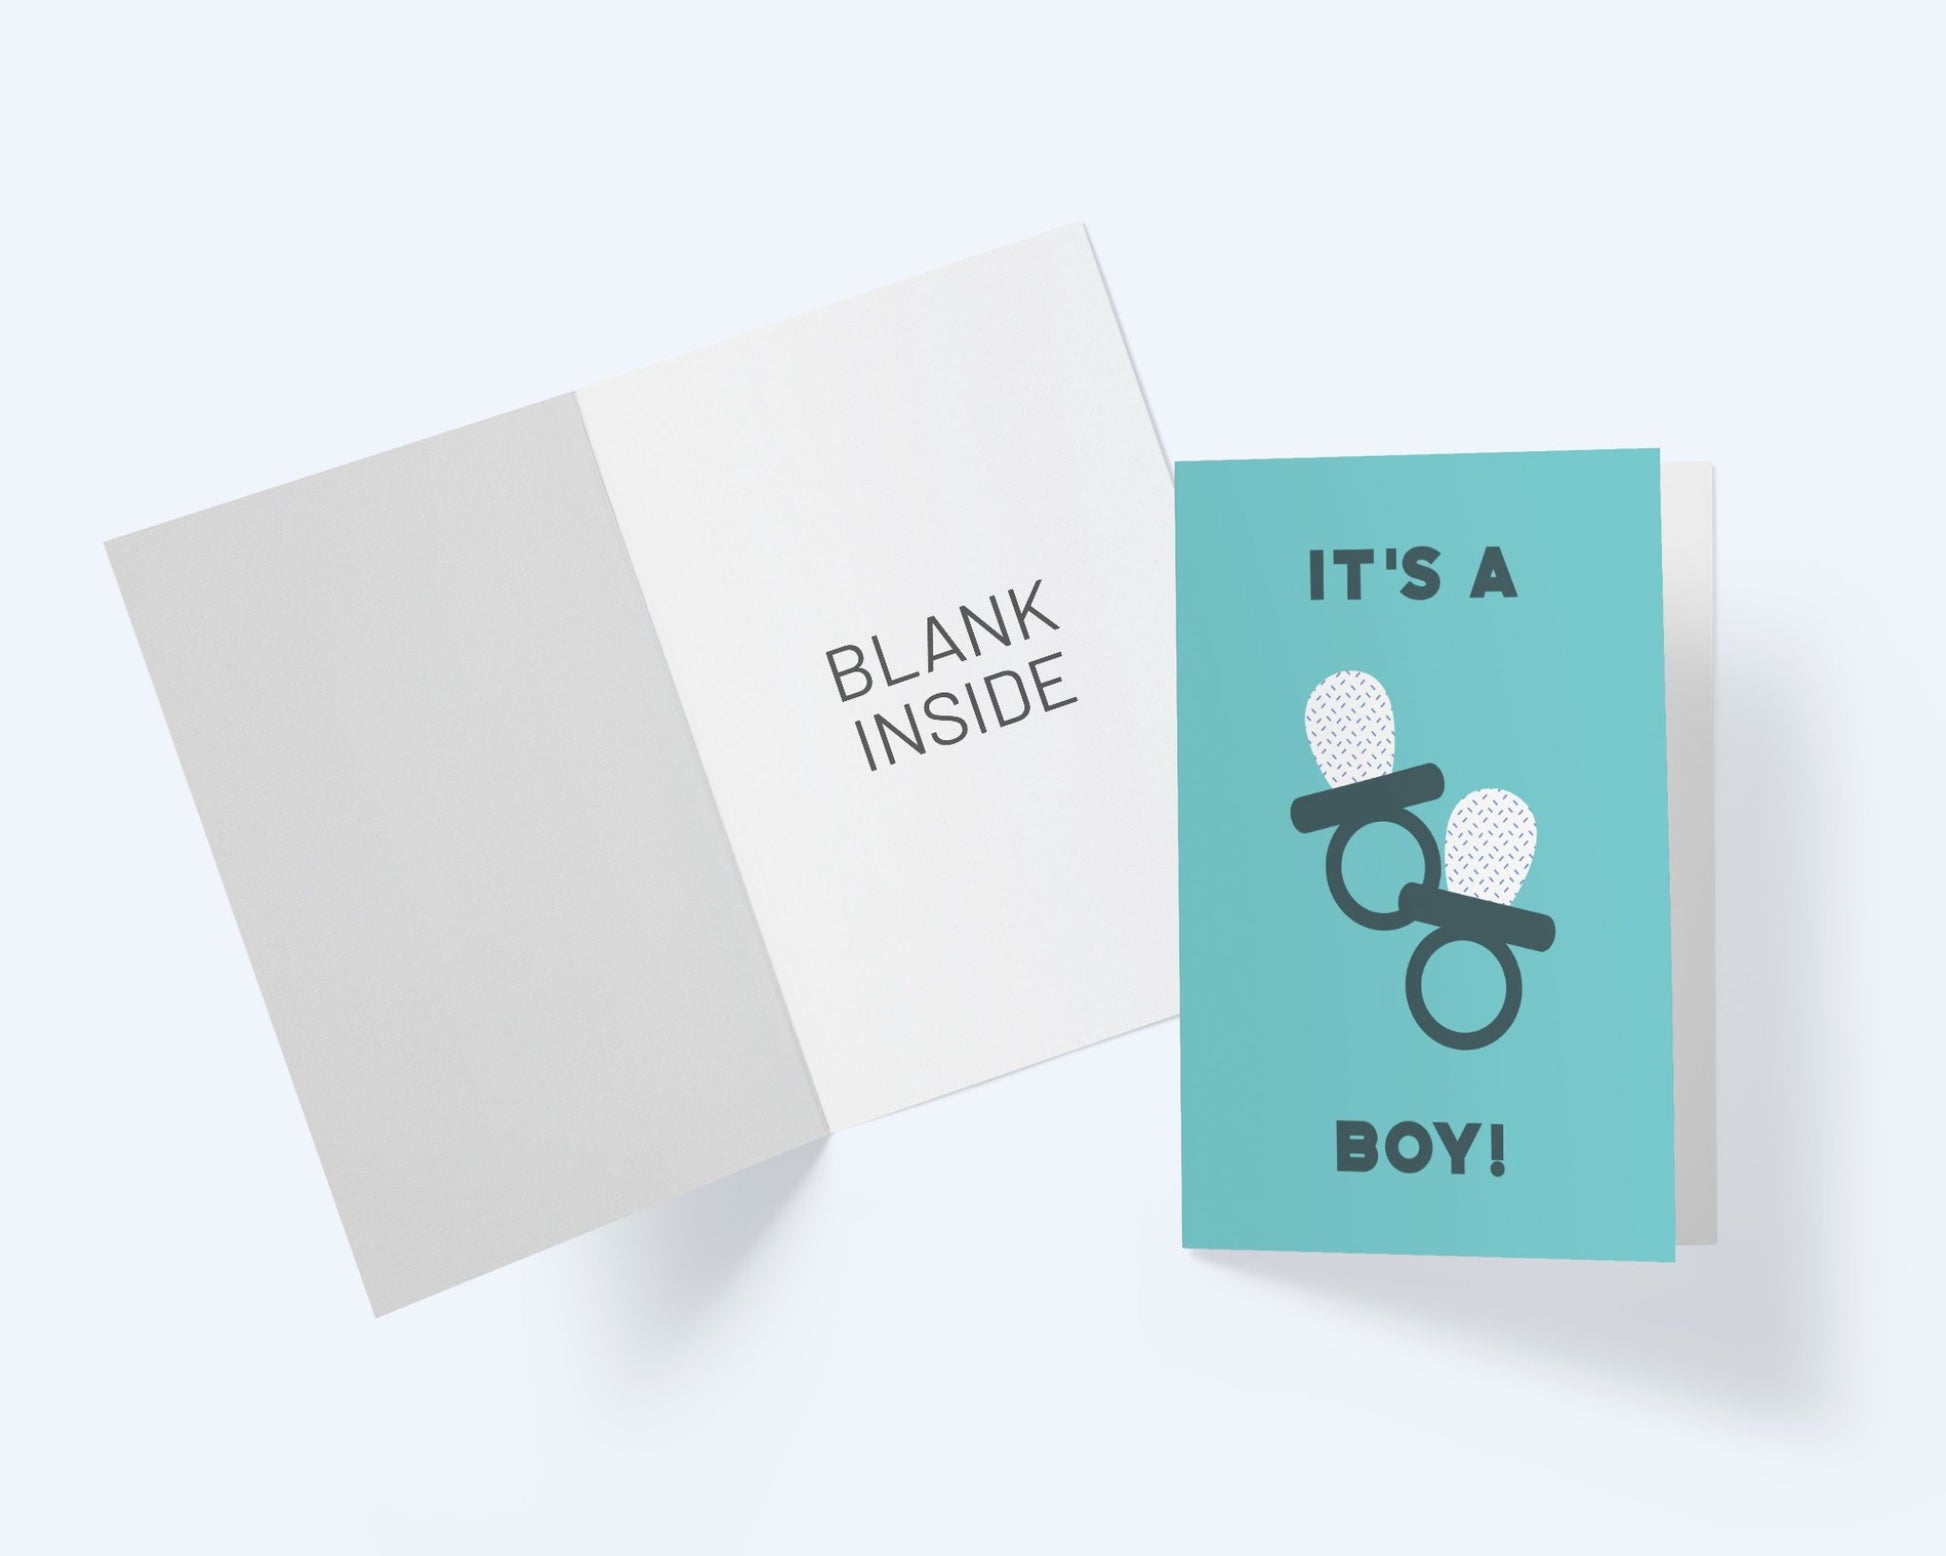 It's a Boy! New Baby - Baby Shower Greeting Card.